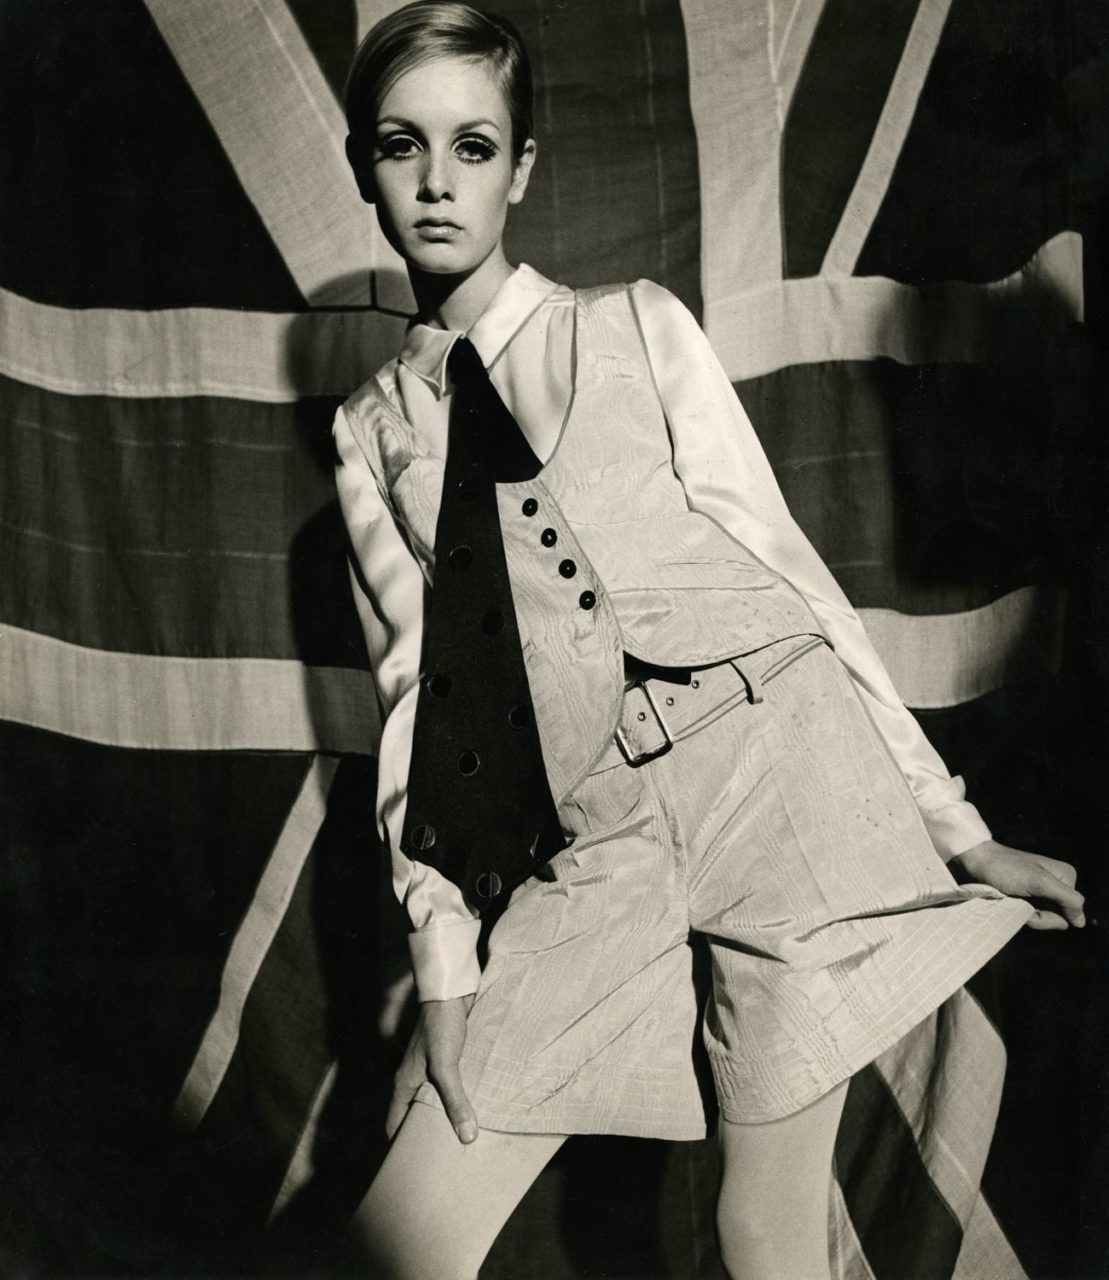 Twiggy modeling a waistcoat ensemble by Mary Quant.